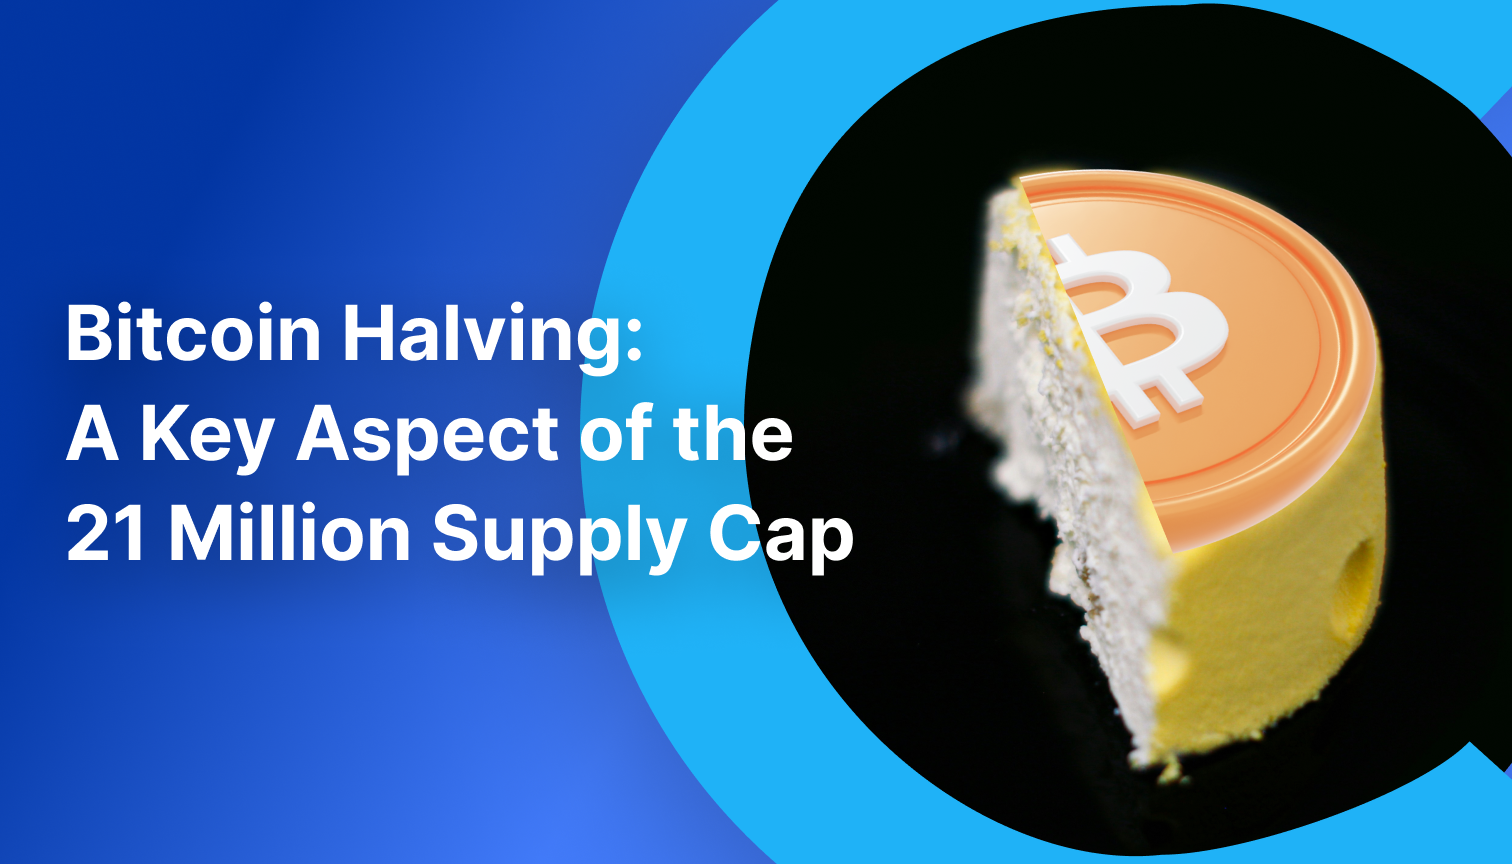 Bitcoin Halving: A key component of the 21 million supply cap